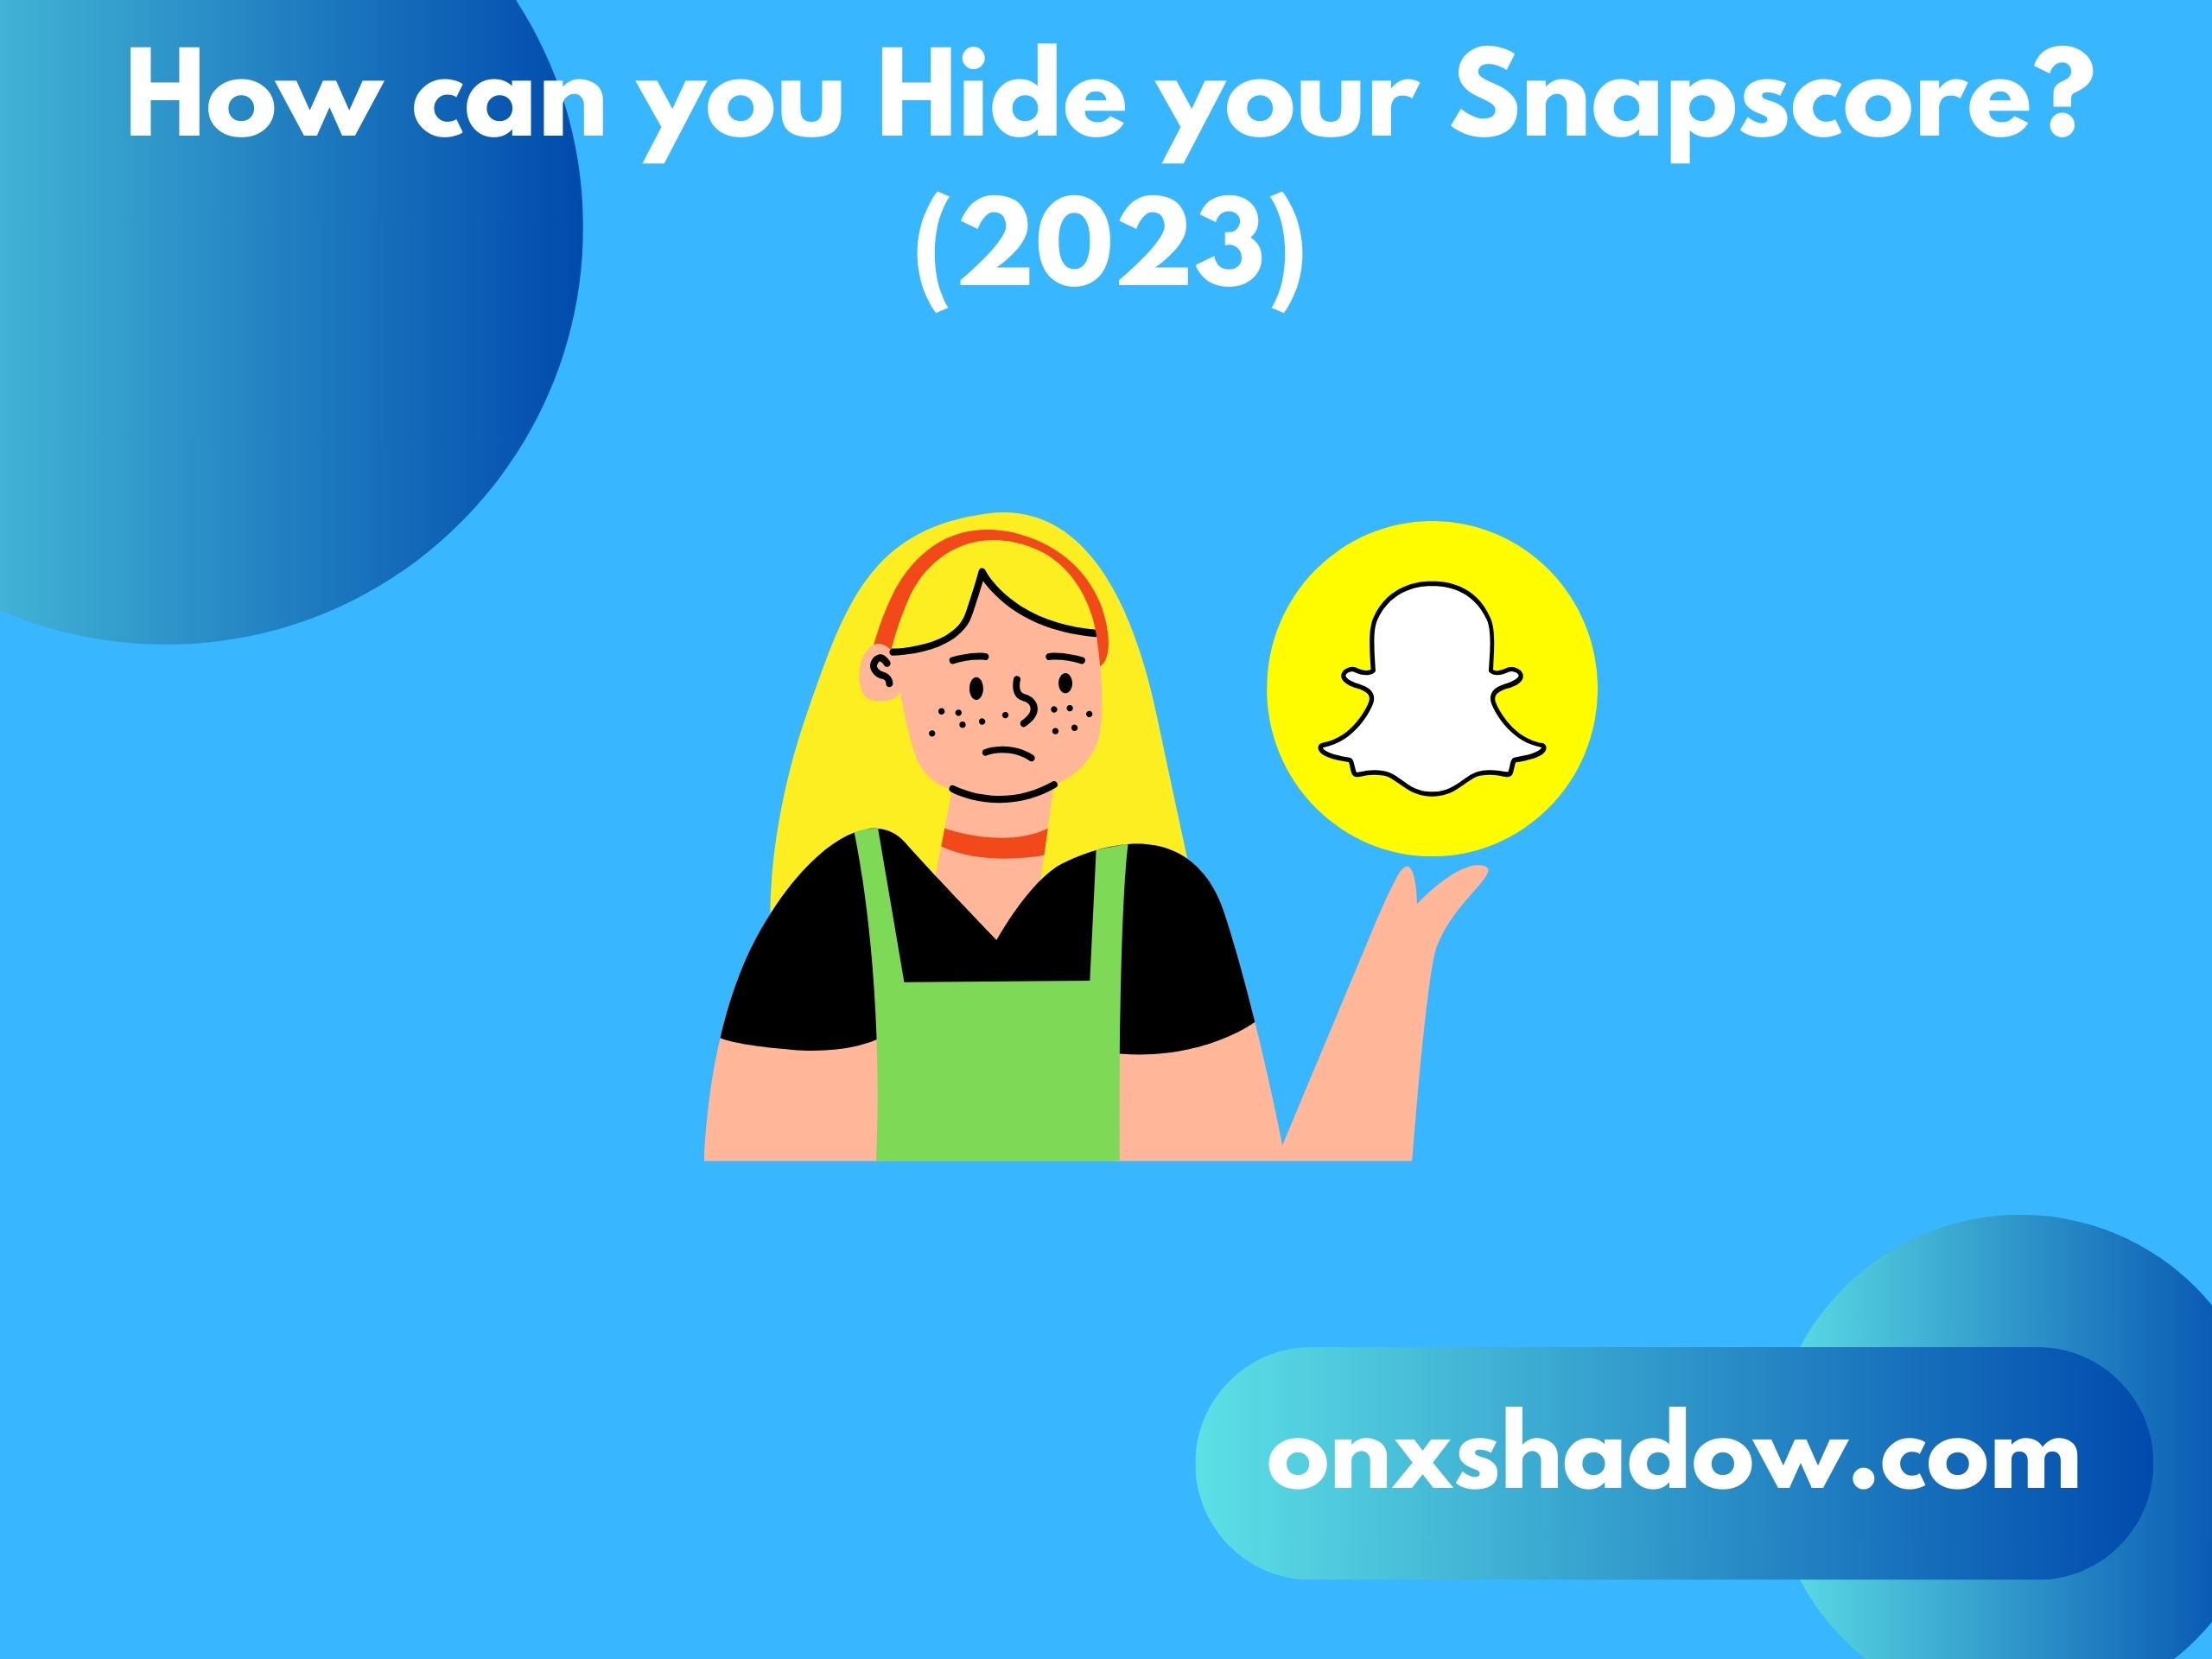 How can you Hide your Snapscore? (2023)